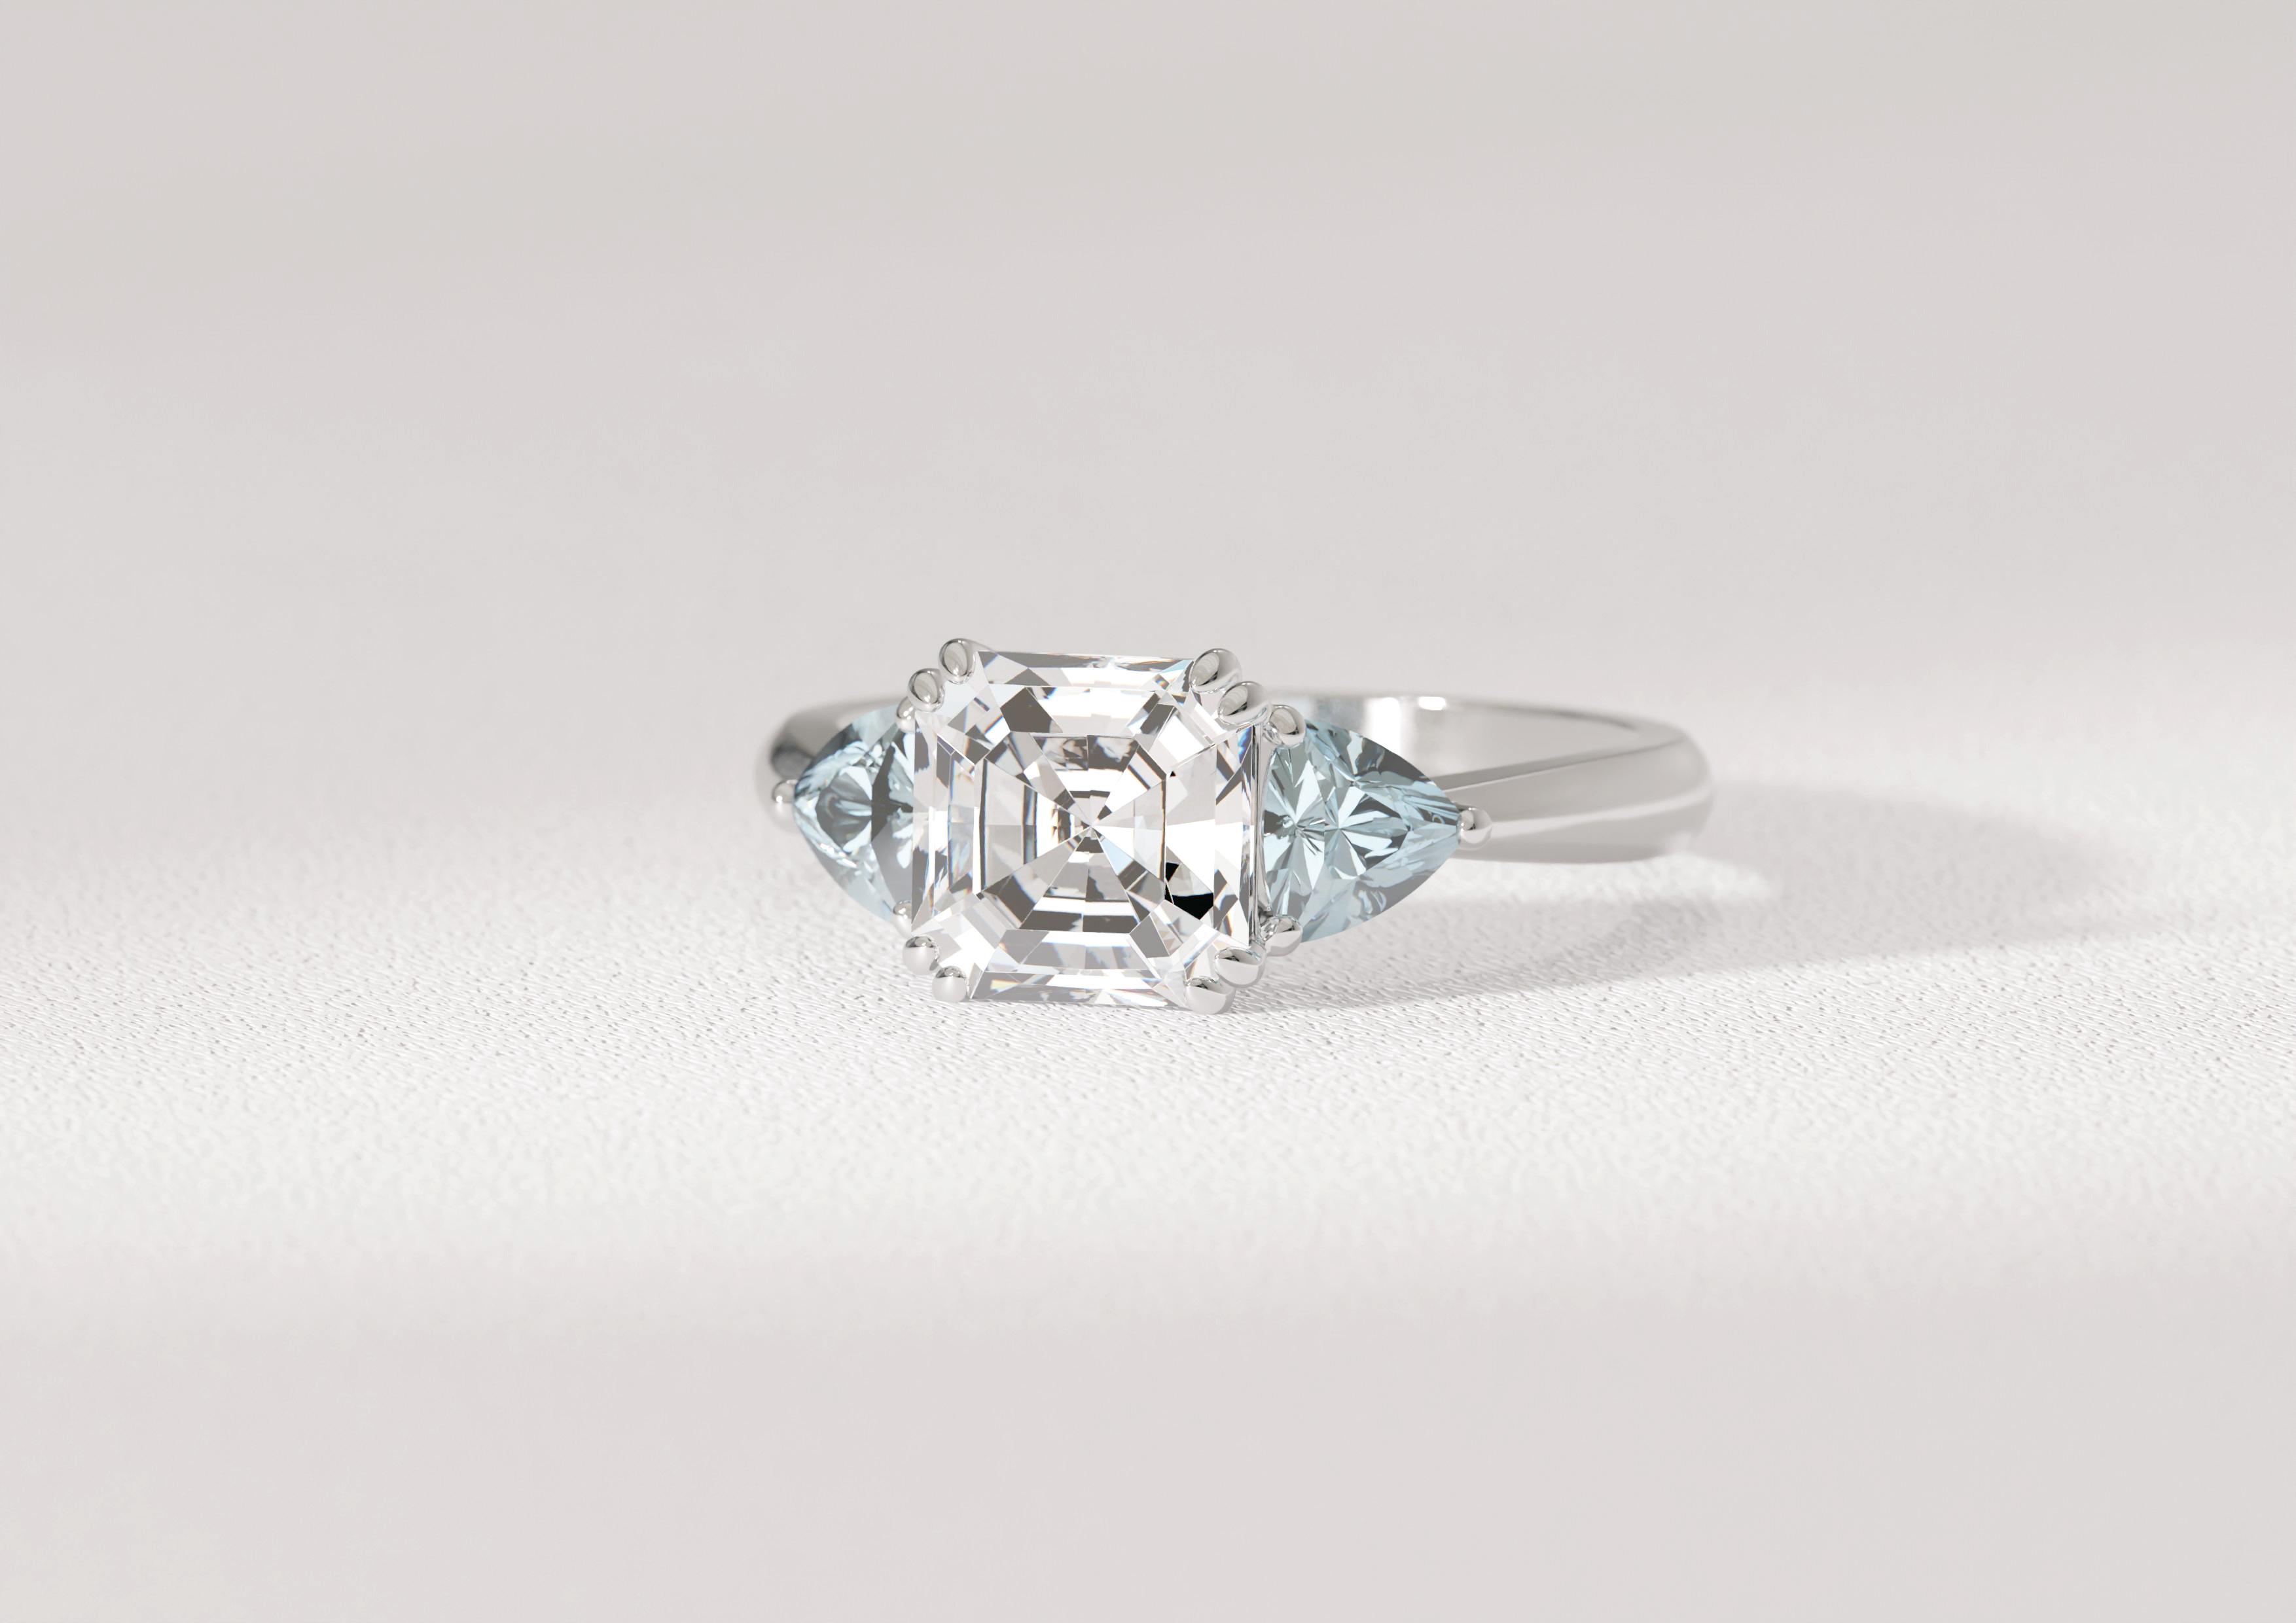 1.5 carat Asscher cut diamond centre stone with two accenting pear aquamarines